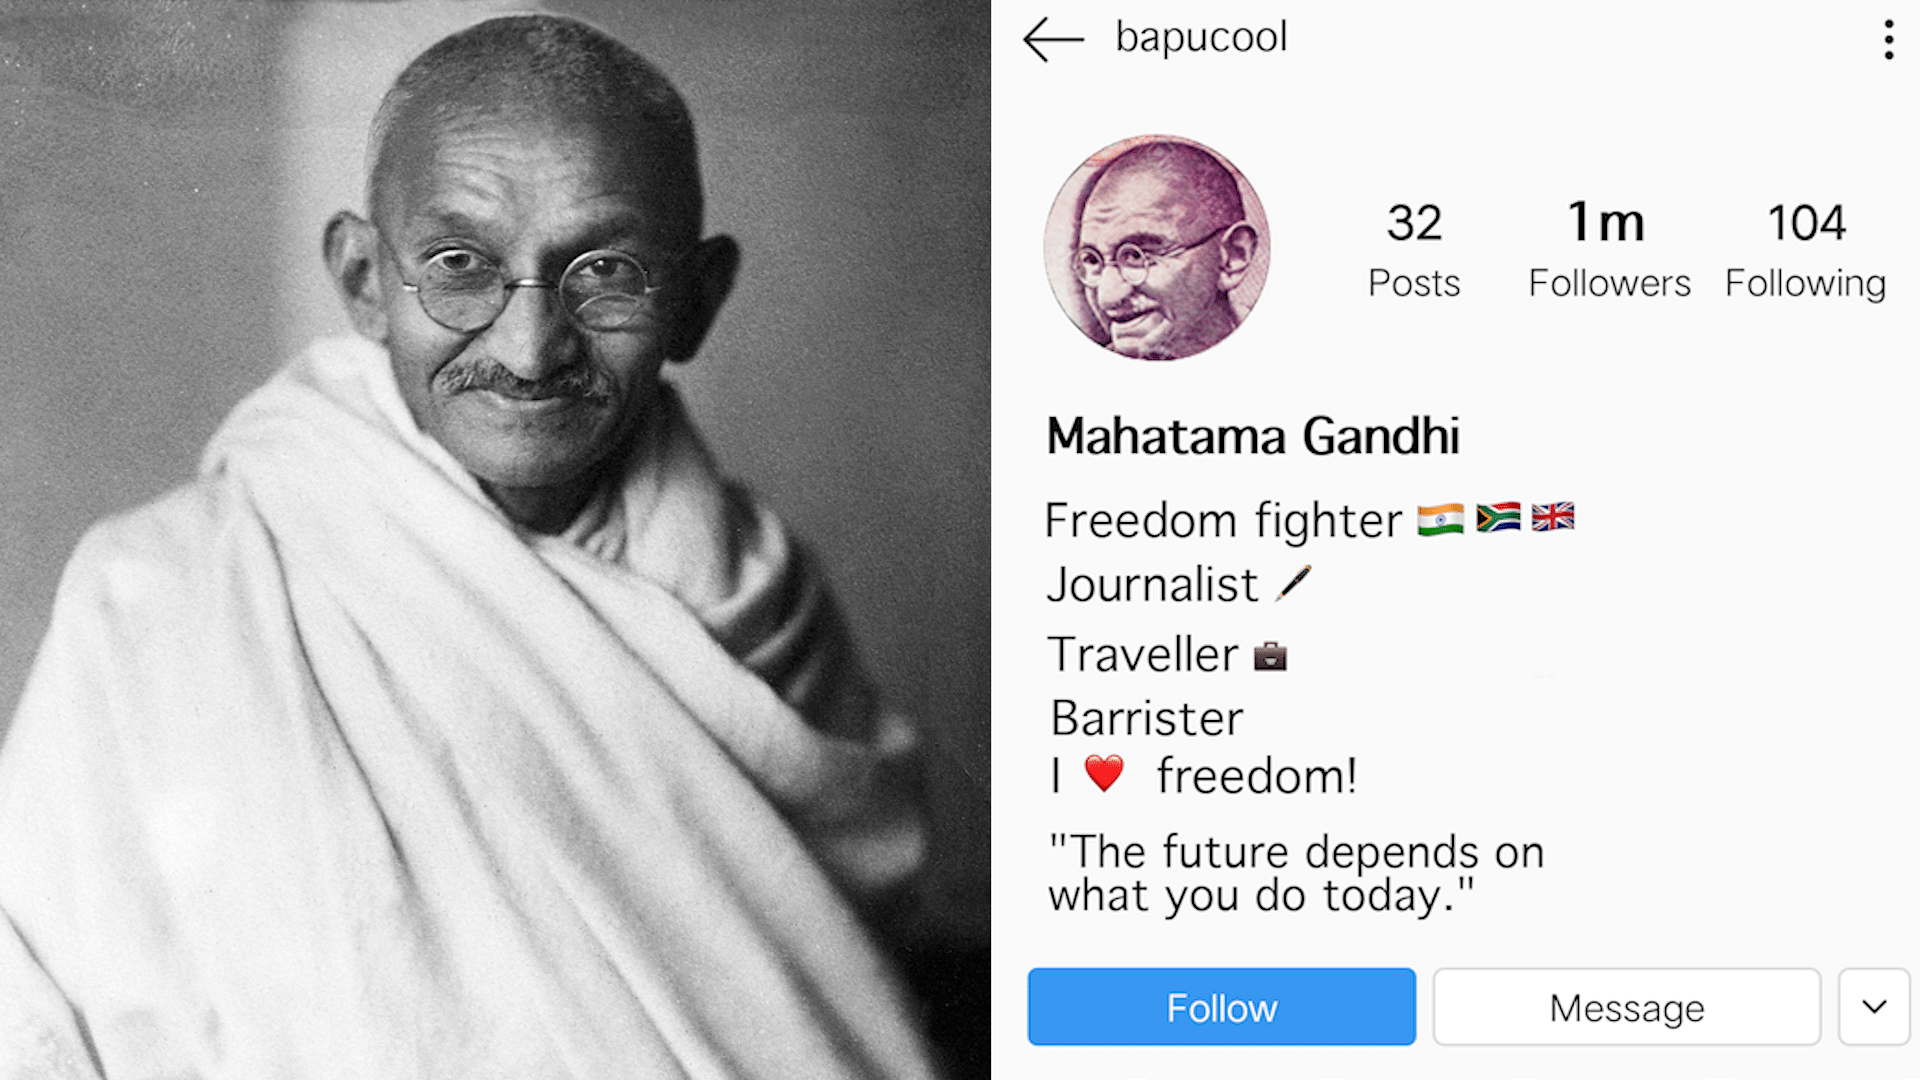 The nation is gearing up to mark Bapu’s 150th birth anniversary. So, here is an exclusive look at Mohandas Karamchand Gandhi’s Instagram account.